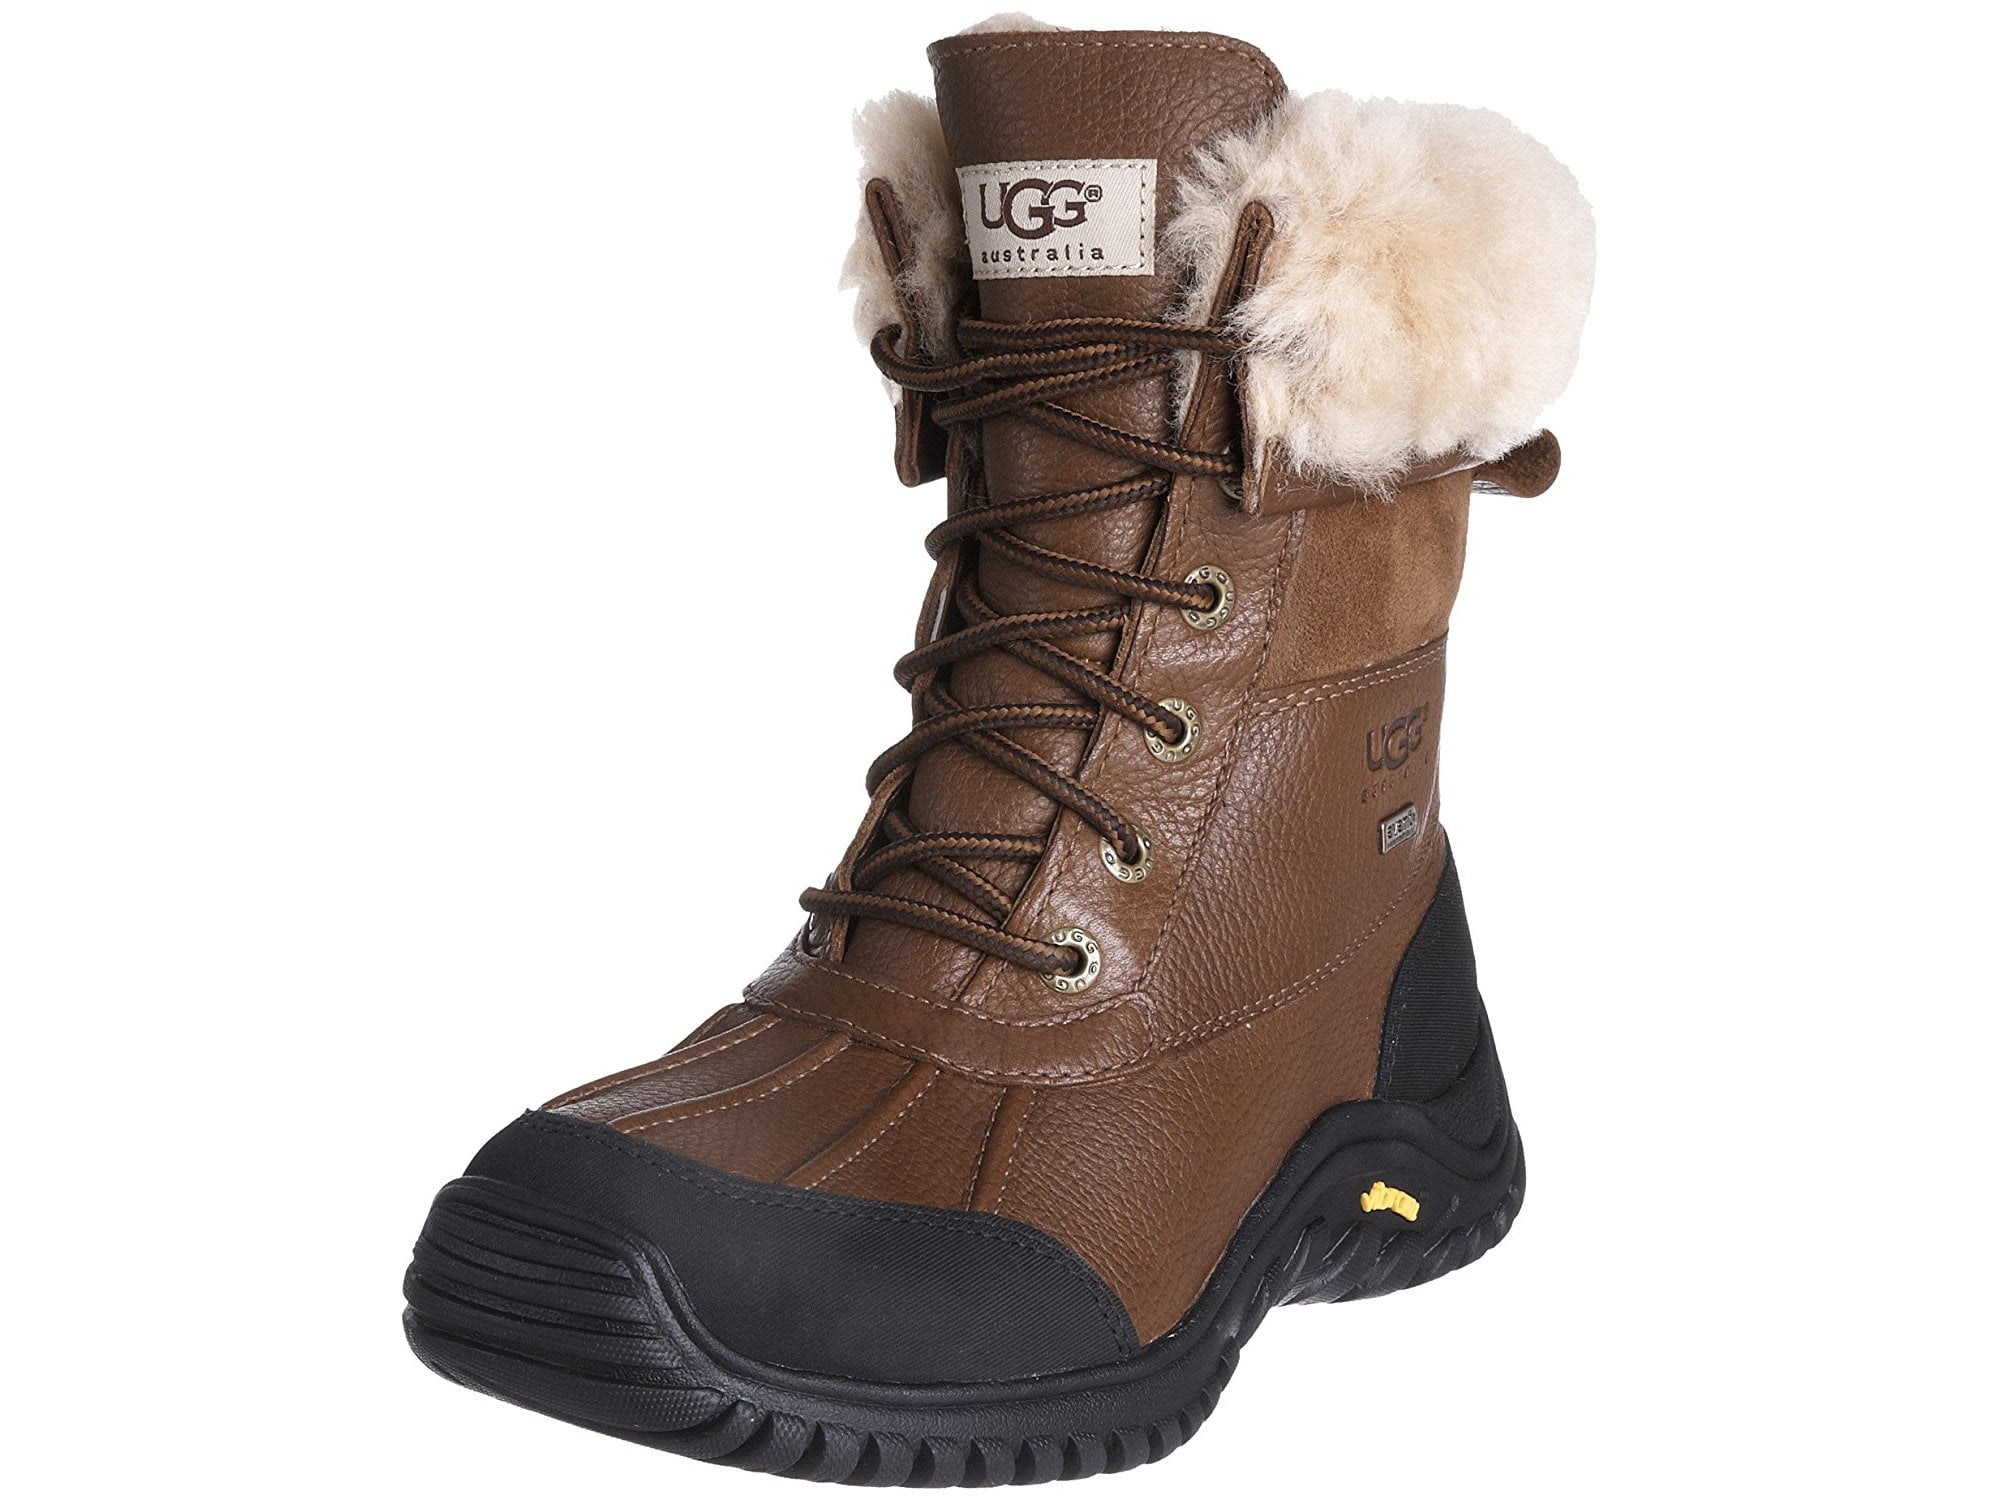 womens ugg winter boots sale